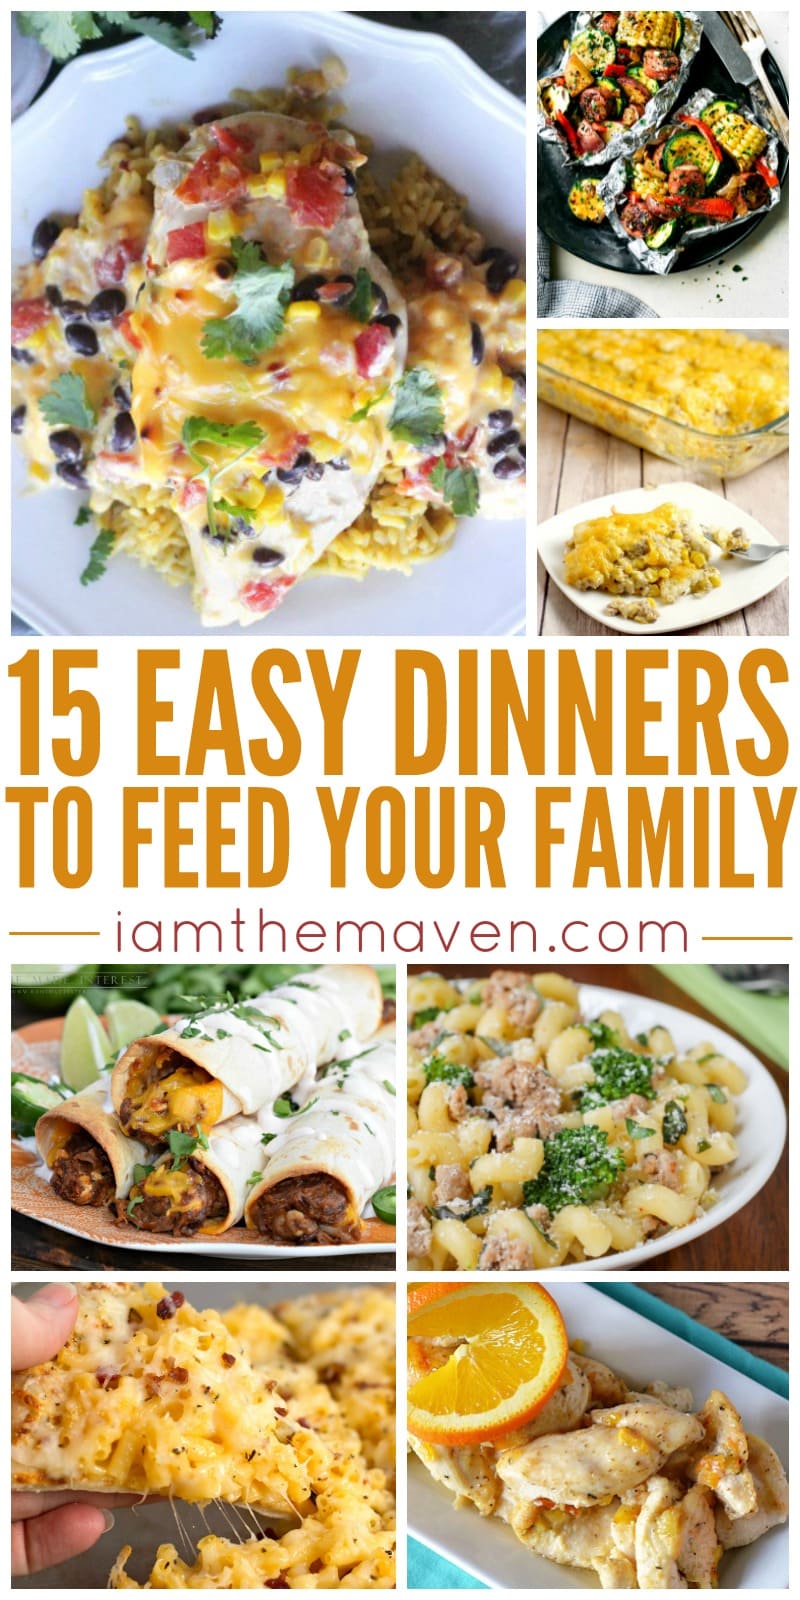 Try One of These Easy Dinner Ideas Tonight! | I am the Maven®